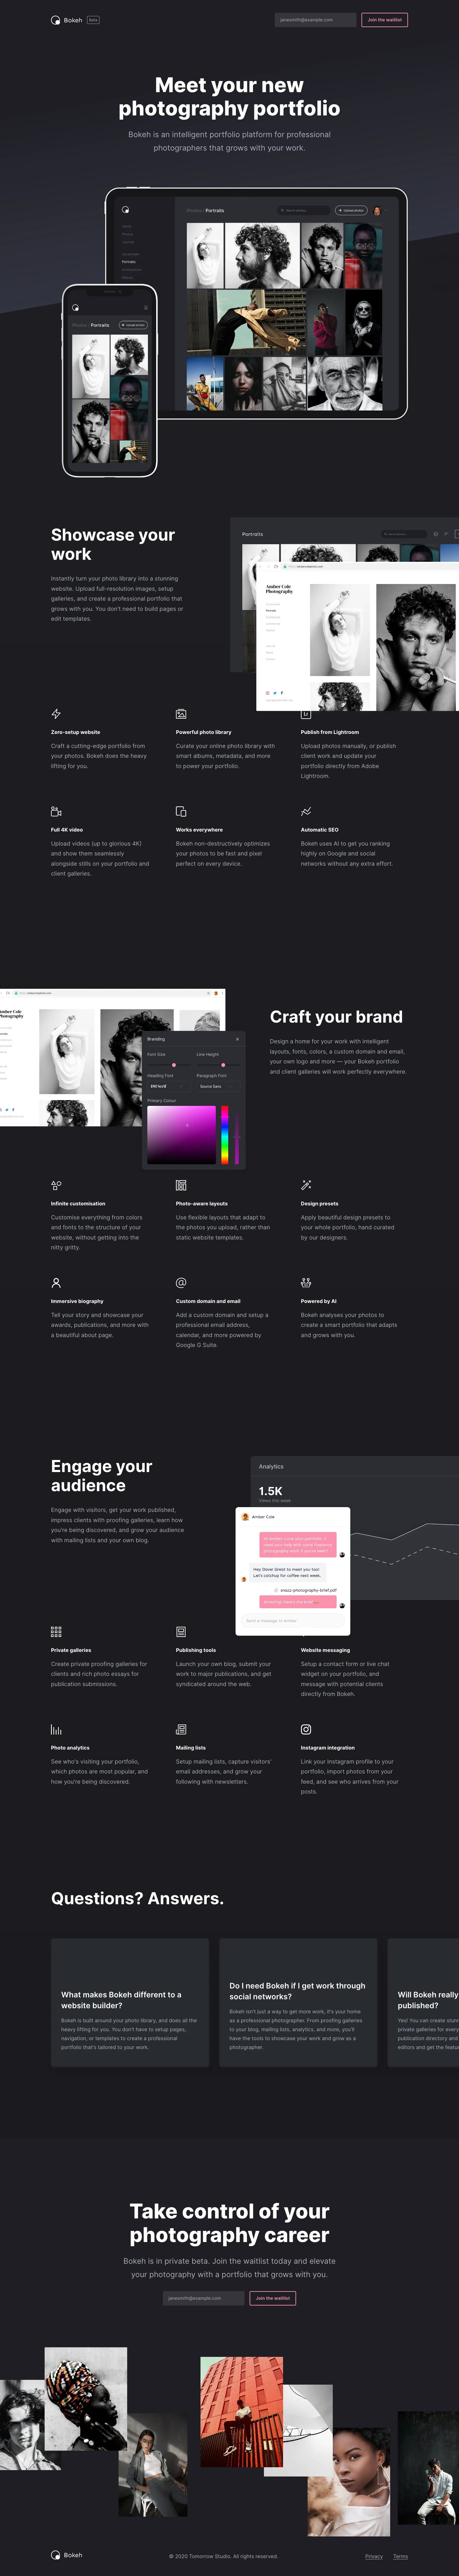 Bokeh Landing Page Example: Meet your new photography portfolio. Bokeh is an intelligent portfolio platform for professional photographers that grows with your work.